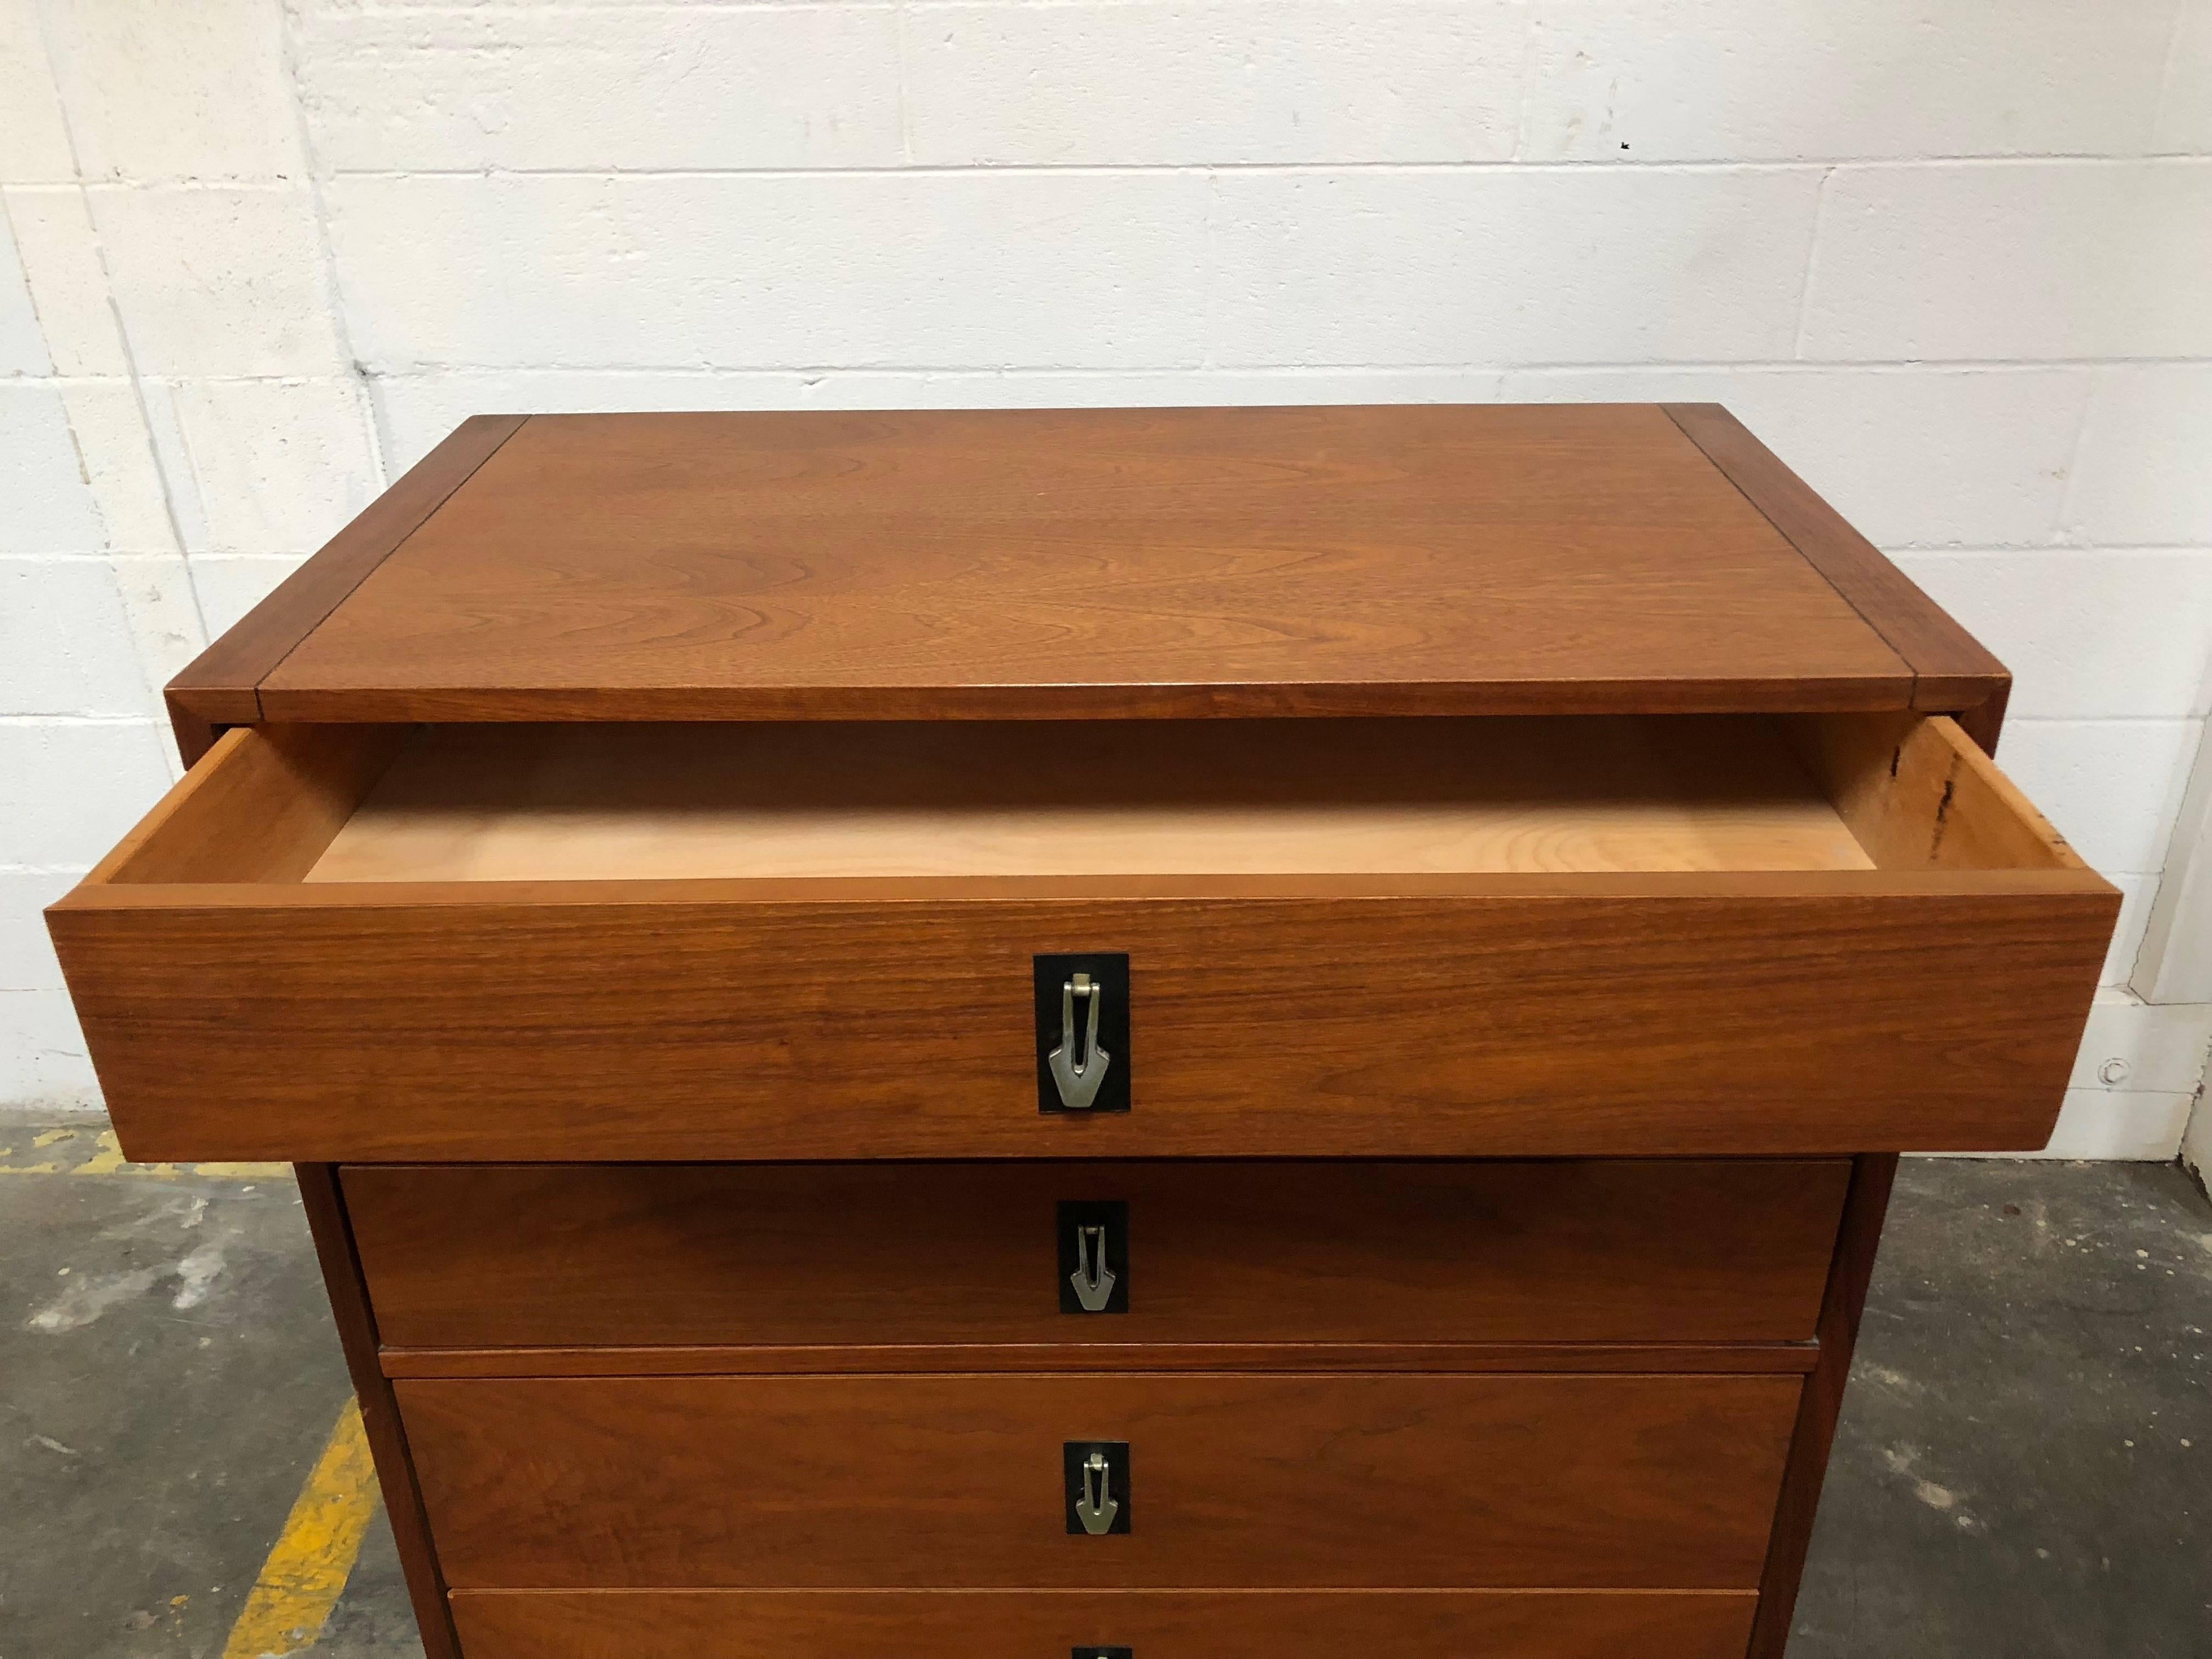 This dresser was handcrafted by the well-loved Brown Saltman (see photo of maker's mark).
Very unique with metal pulls for the drawers. This piece is vintage, but timeless.